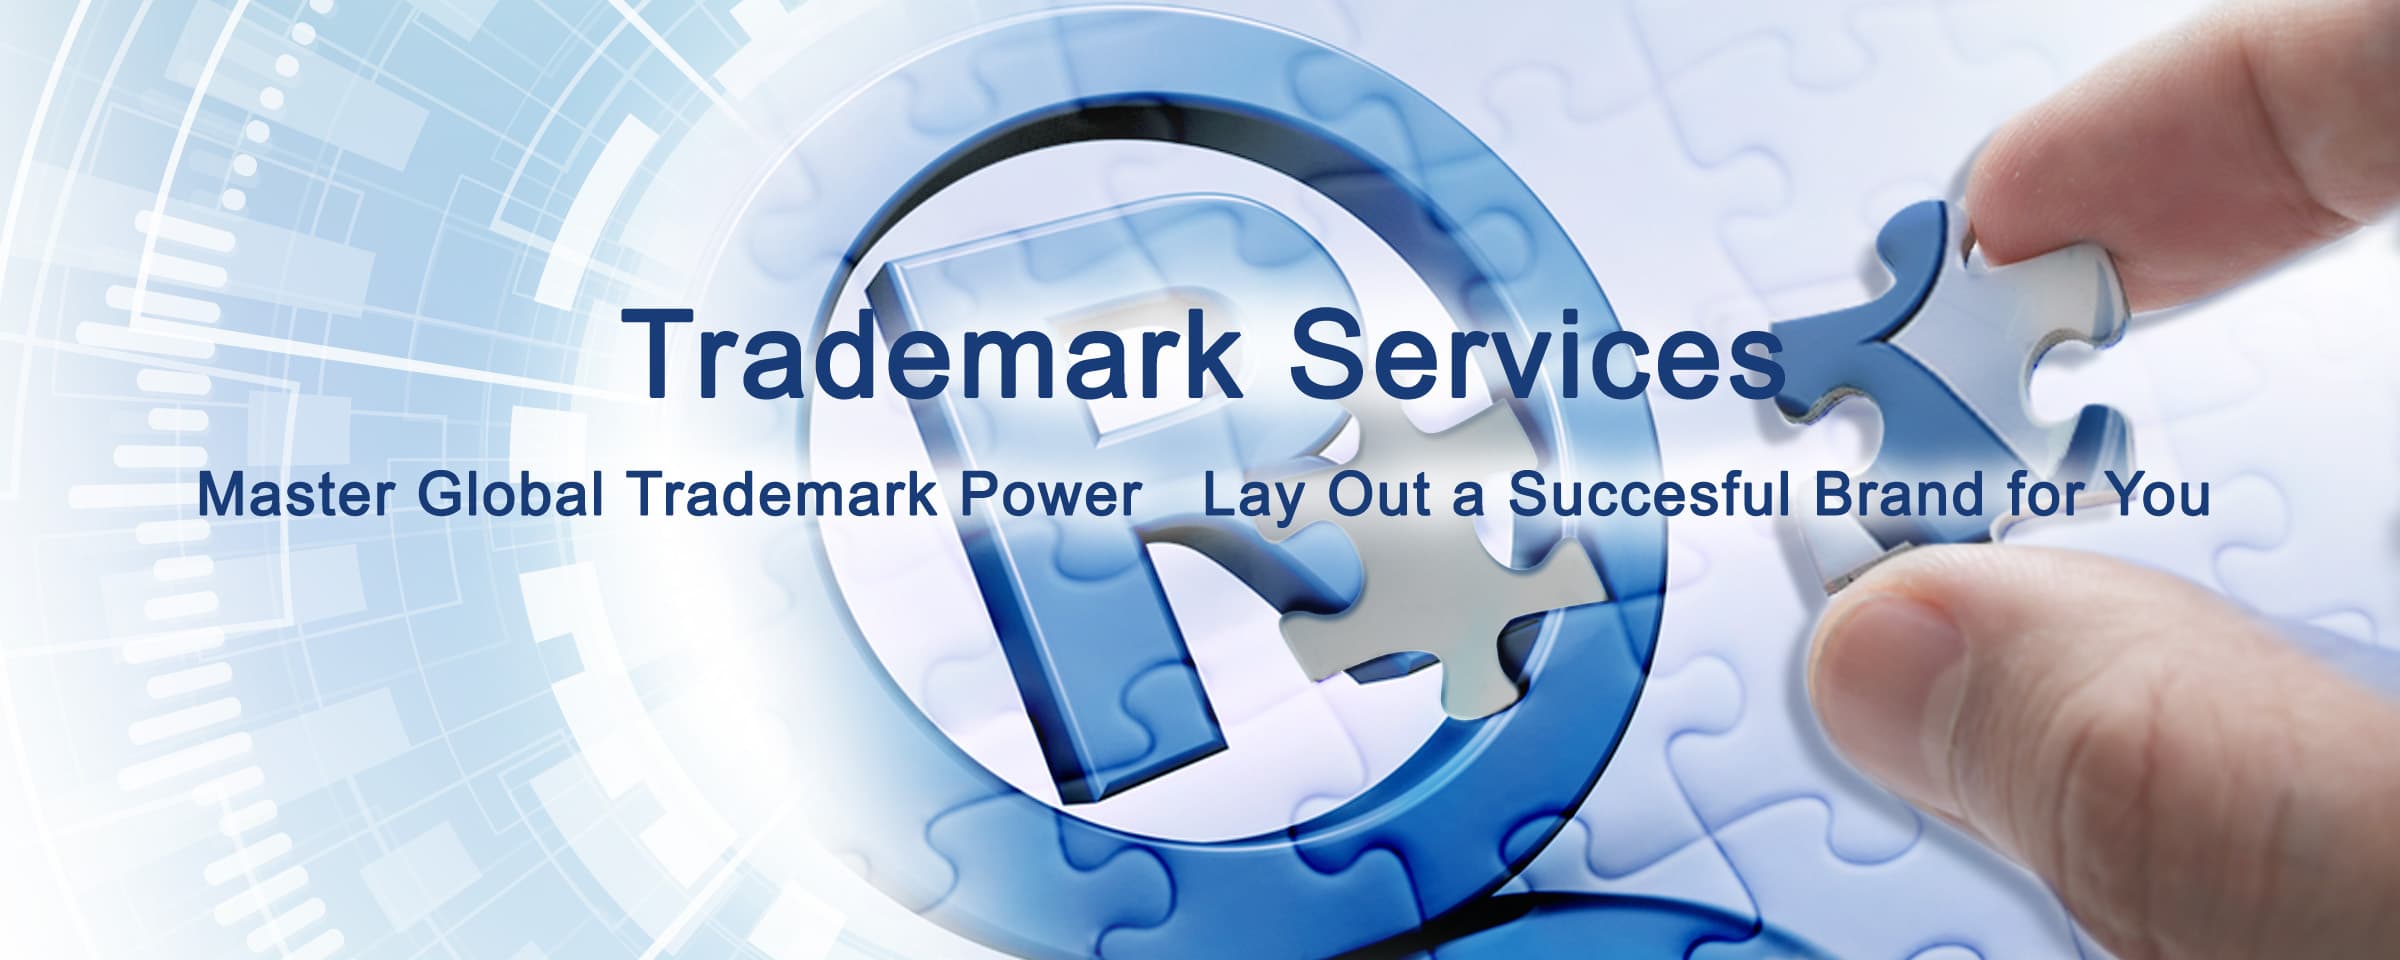 Trademark Services – Master global trademark power / Lay out a successful brand for you